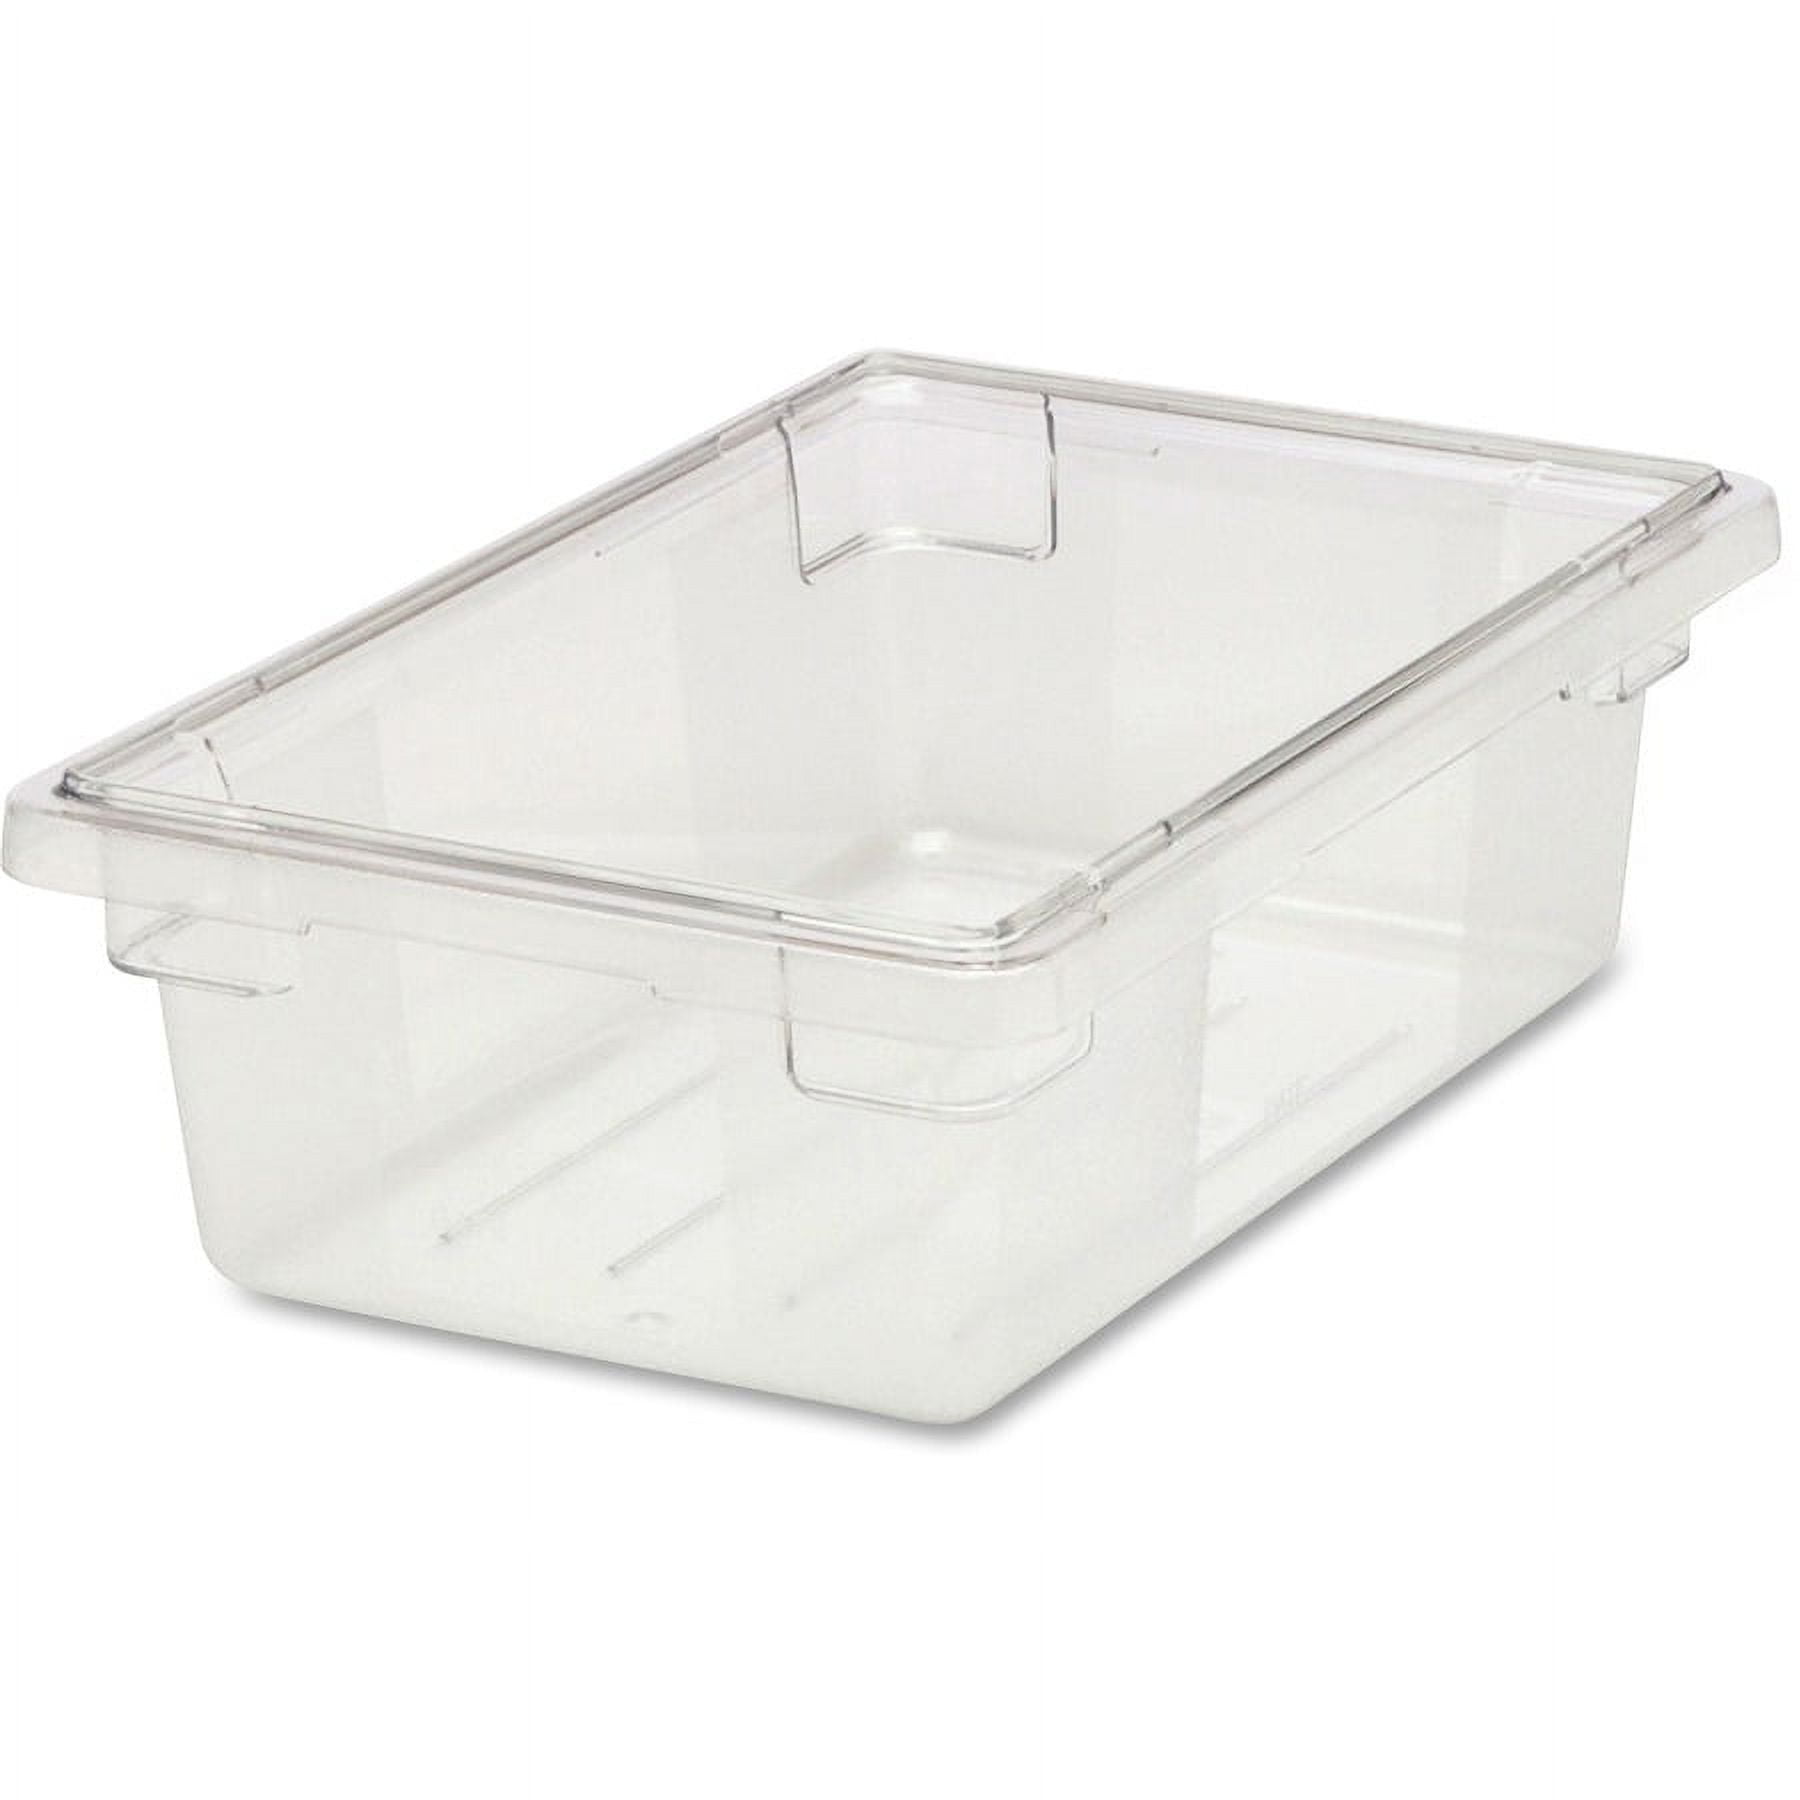 Rubbermaid Commercial Products Cold Food Insert Pan for  Restaurants/Kitchens/Cafeterias, 1/2 Size, 6 Inches Deep, Clear  (FG125P00CLR)